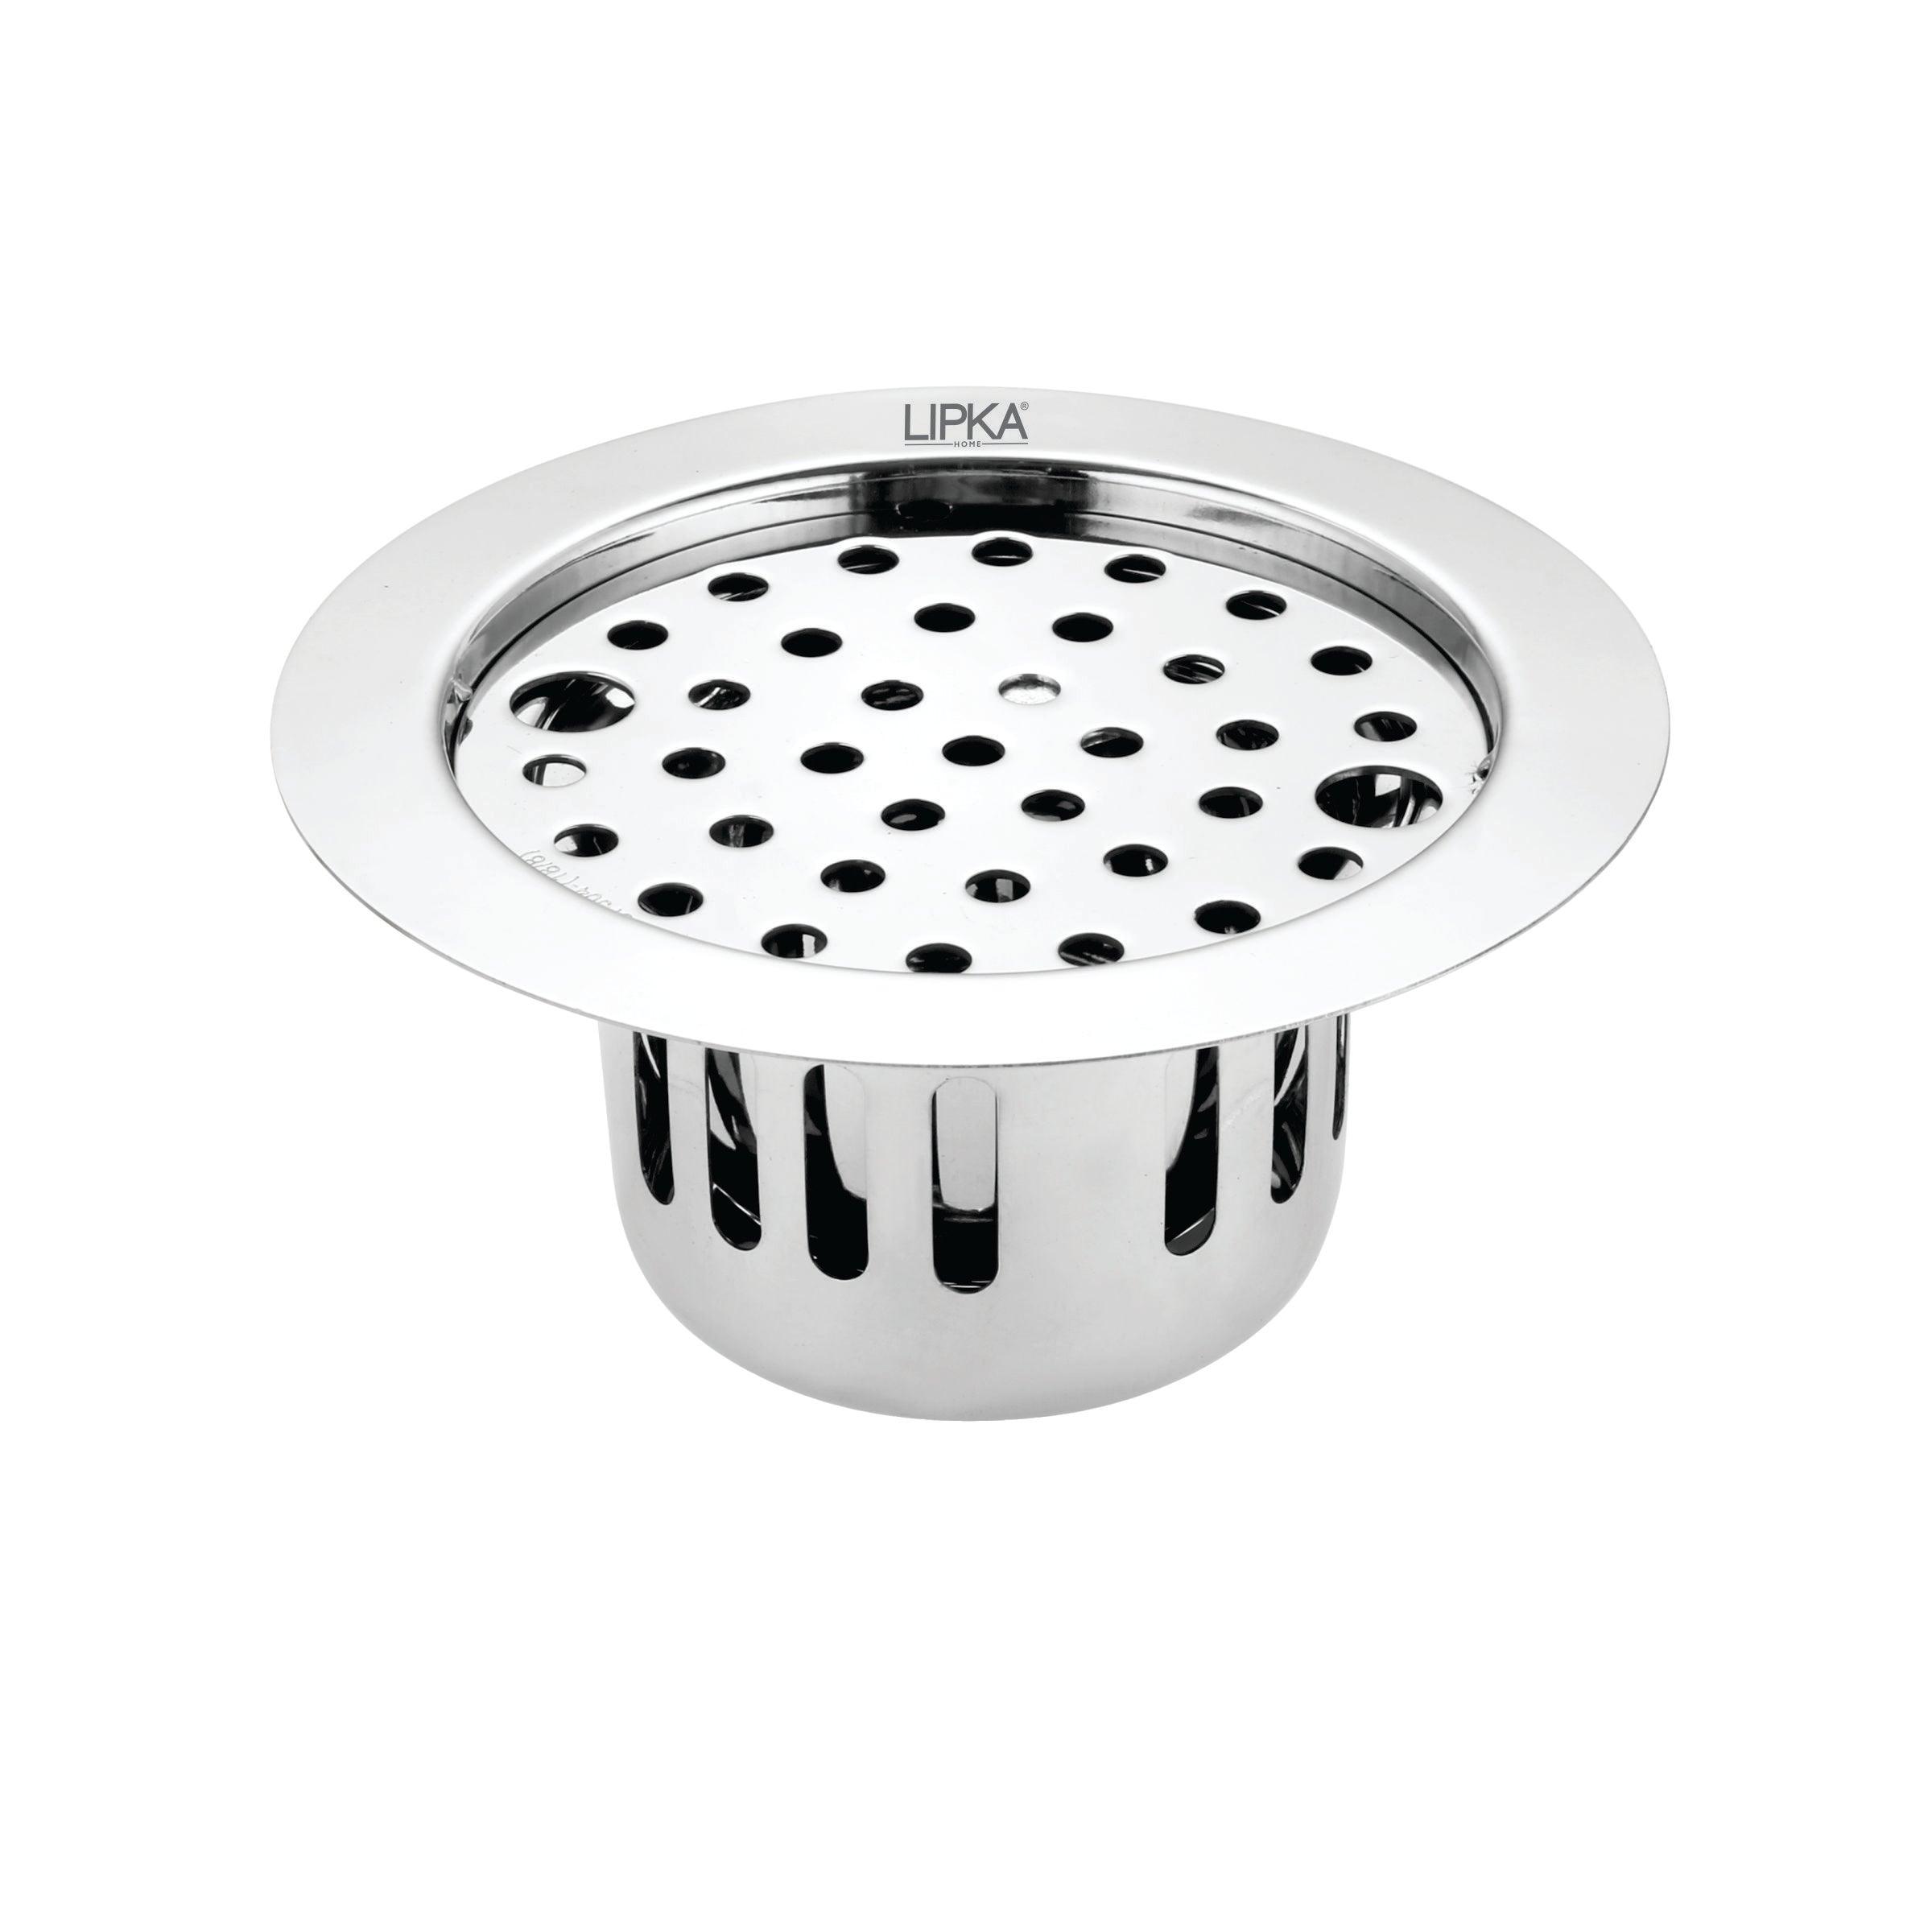 Round Flat Cut Floor Drain (5.5 inches) with Lock & Cockroach Trap